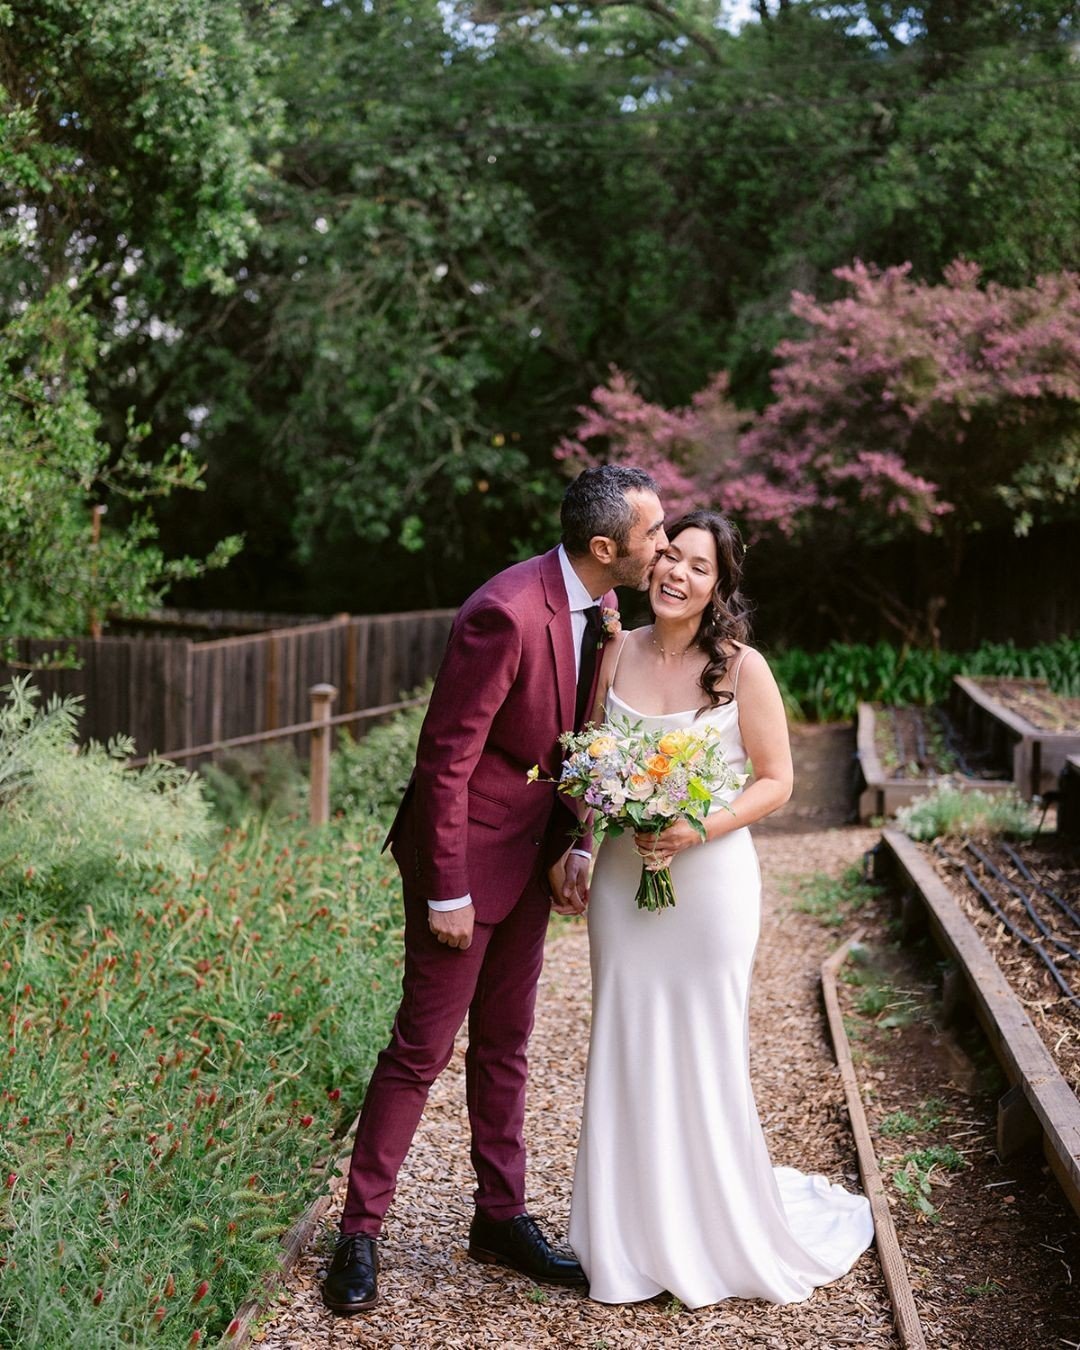 Lina + Rey 💍⁠
⁠
Saying this day was full of love and laughter would be the understatement of the year.⁠
⁠
Lina and Rey's wedding was overflowing with joy and their magical love was present in every guest and detail (including their adorable fur-babi